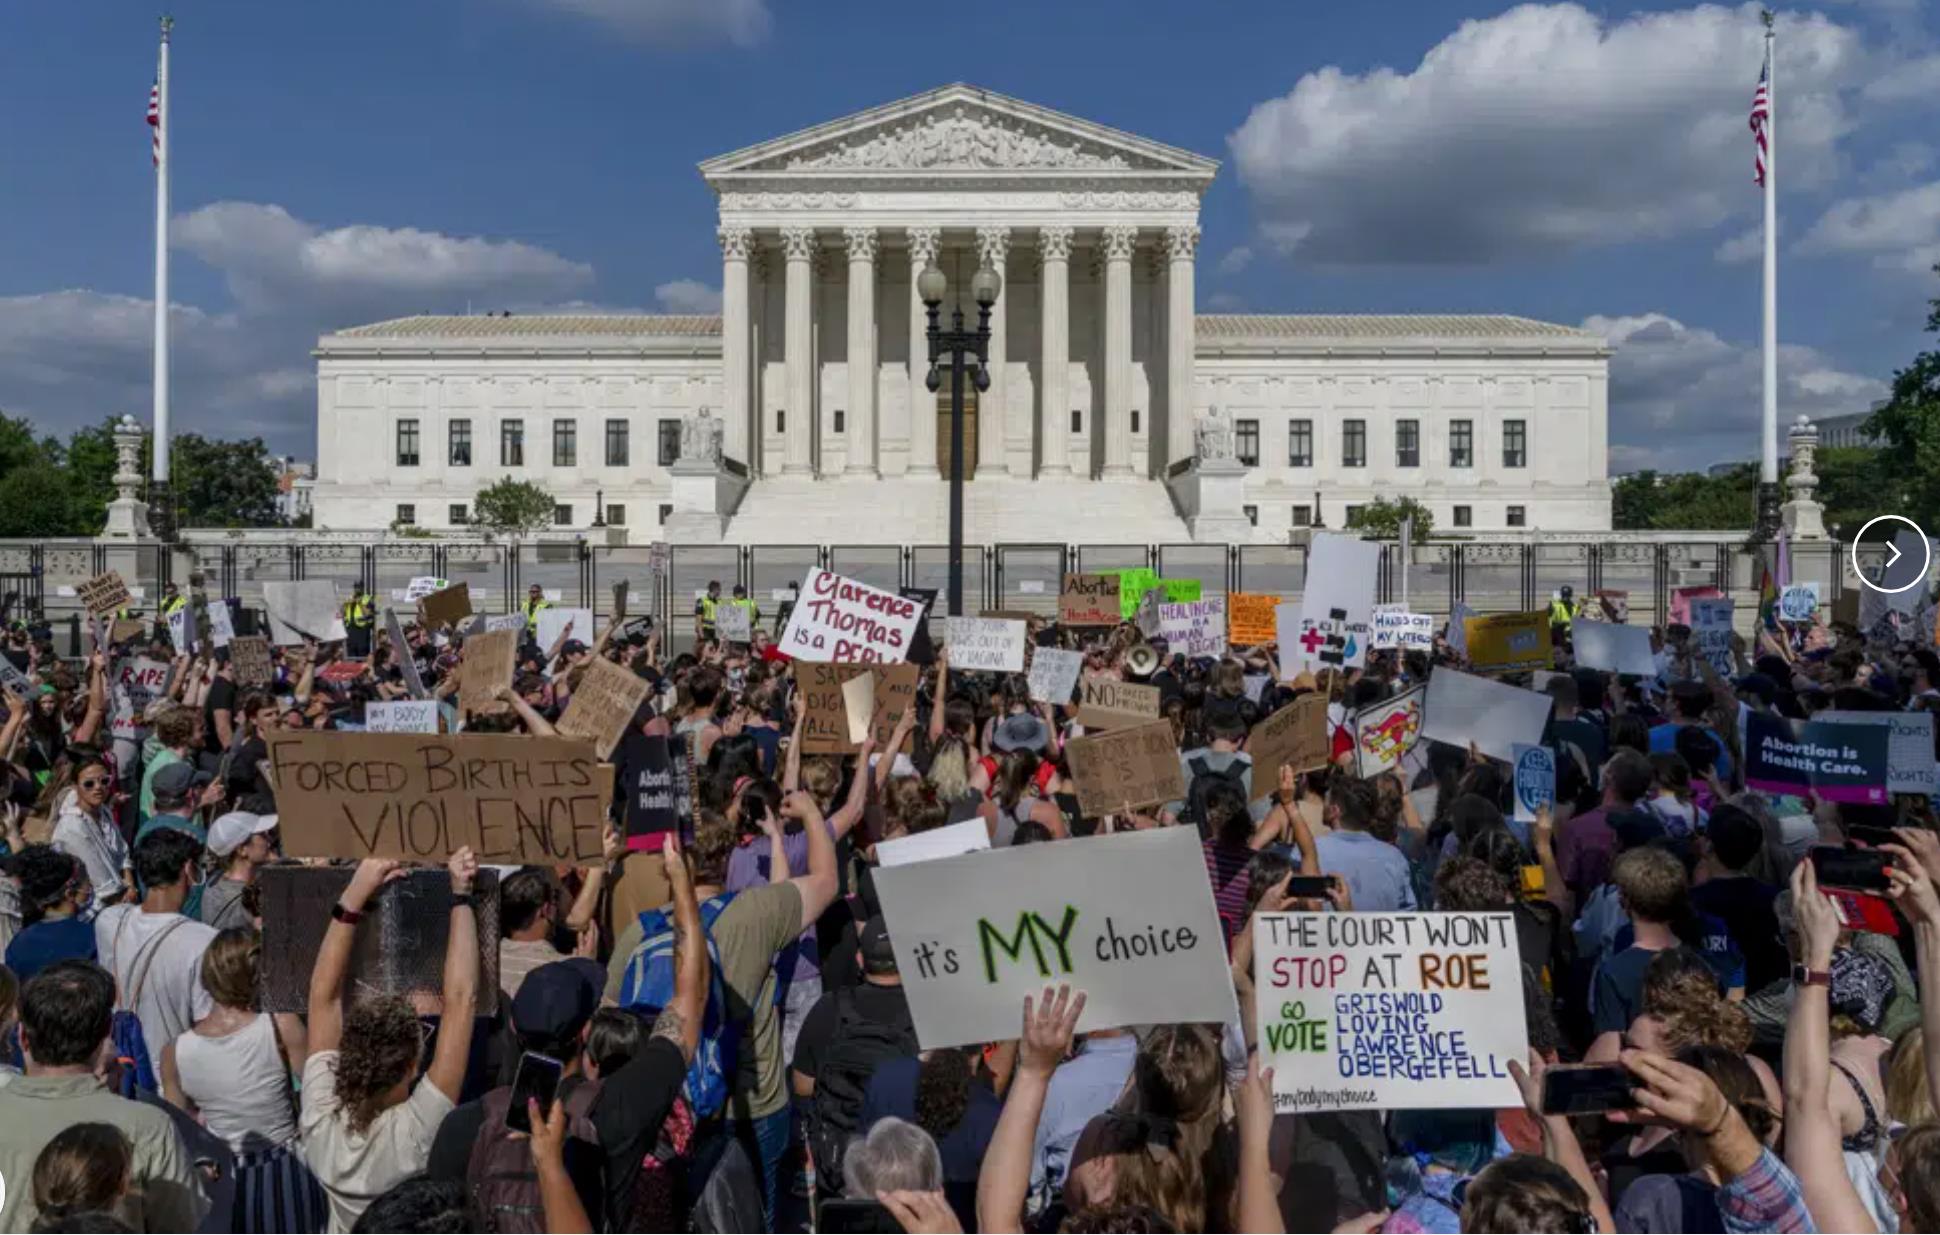 Trust in Supreme Court fell to lowest point in 50 years after abortion decision, poll shows